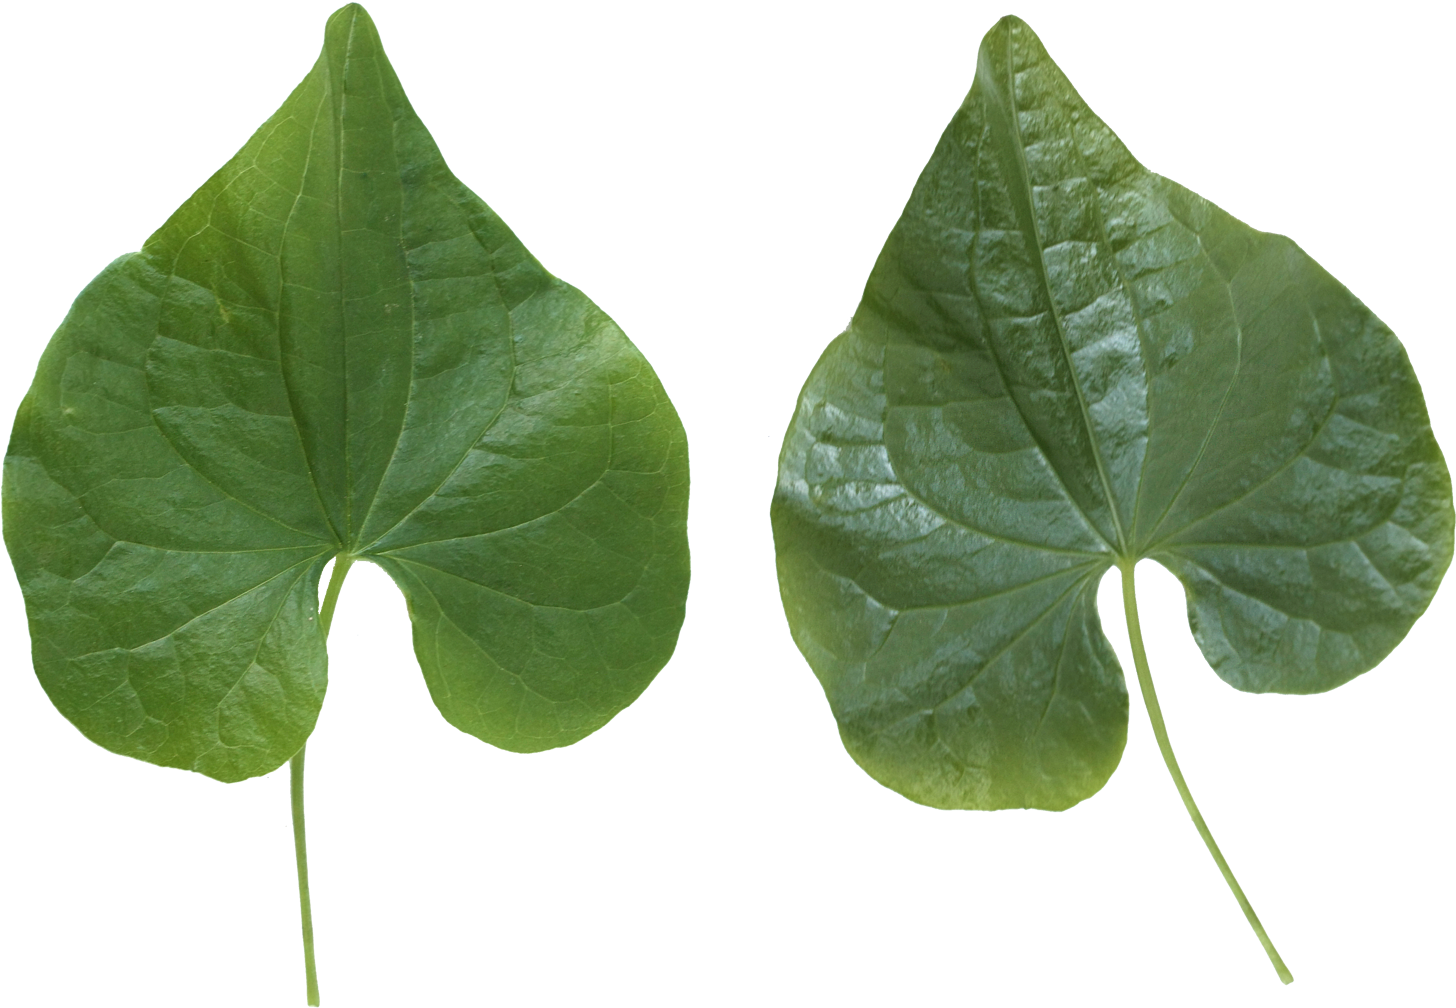 Green Leaves - Flower Leaf Texture Png (1600x1138)